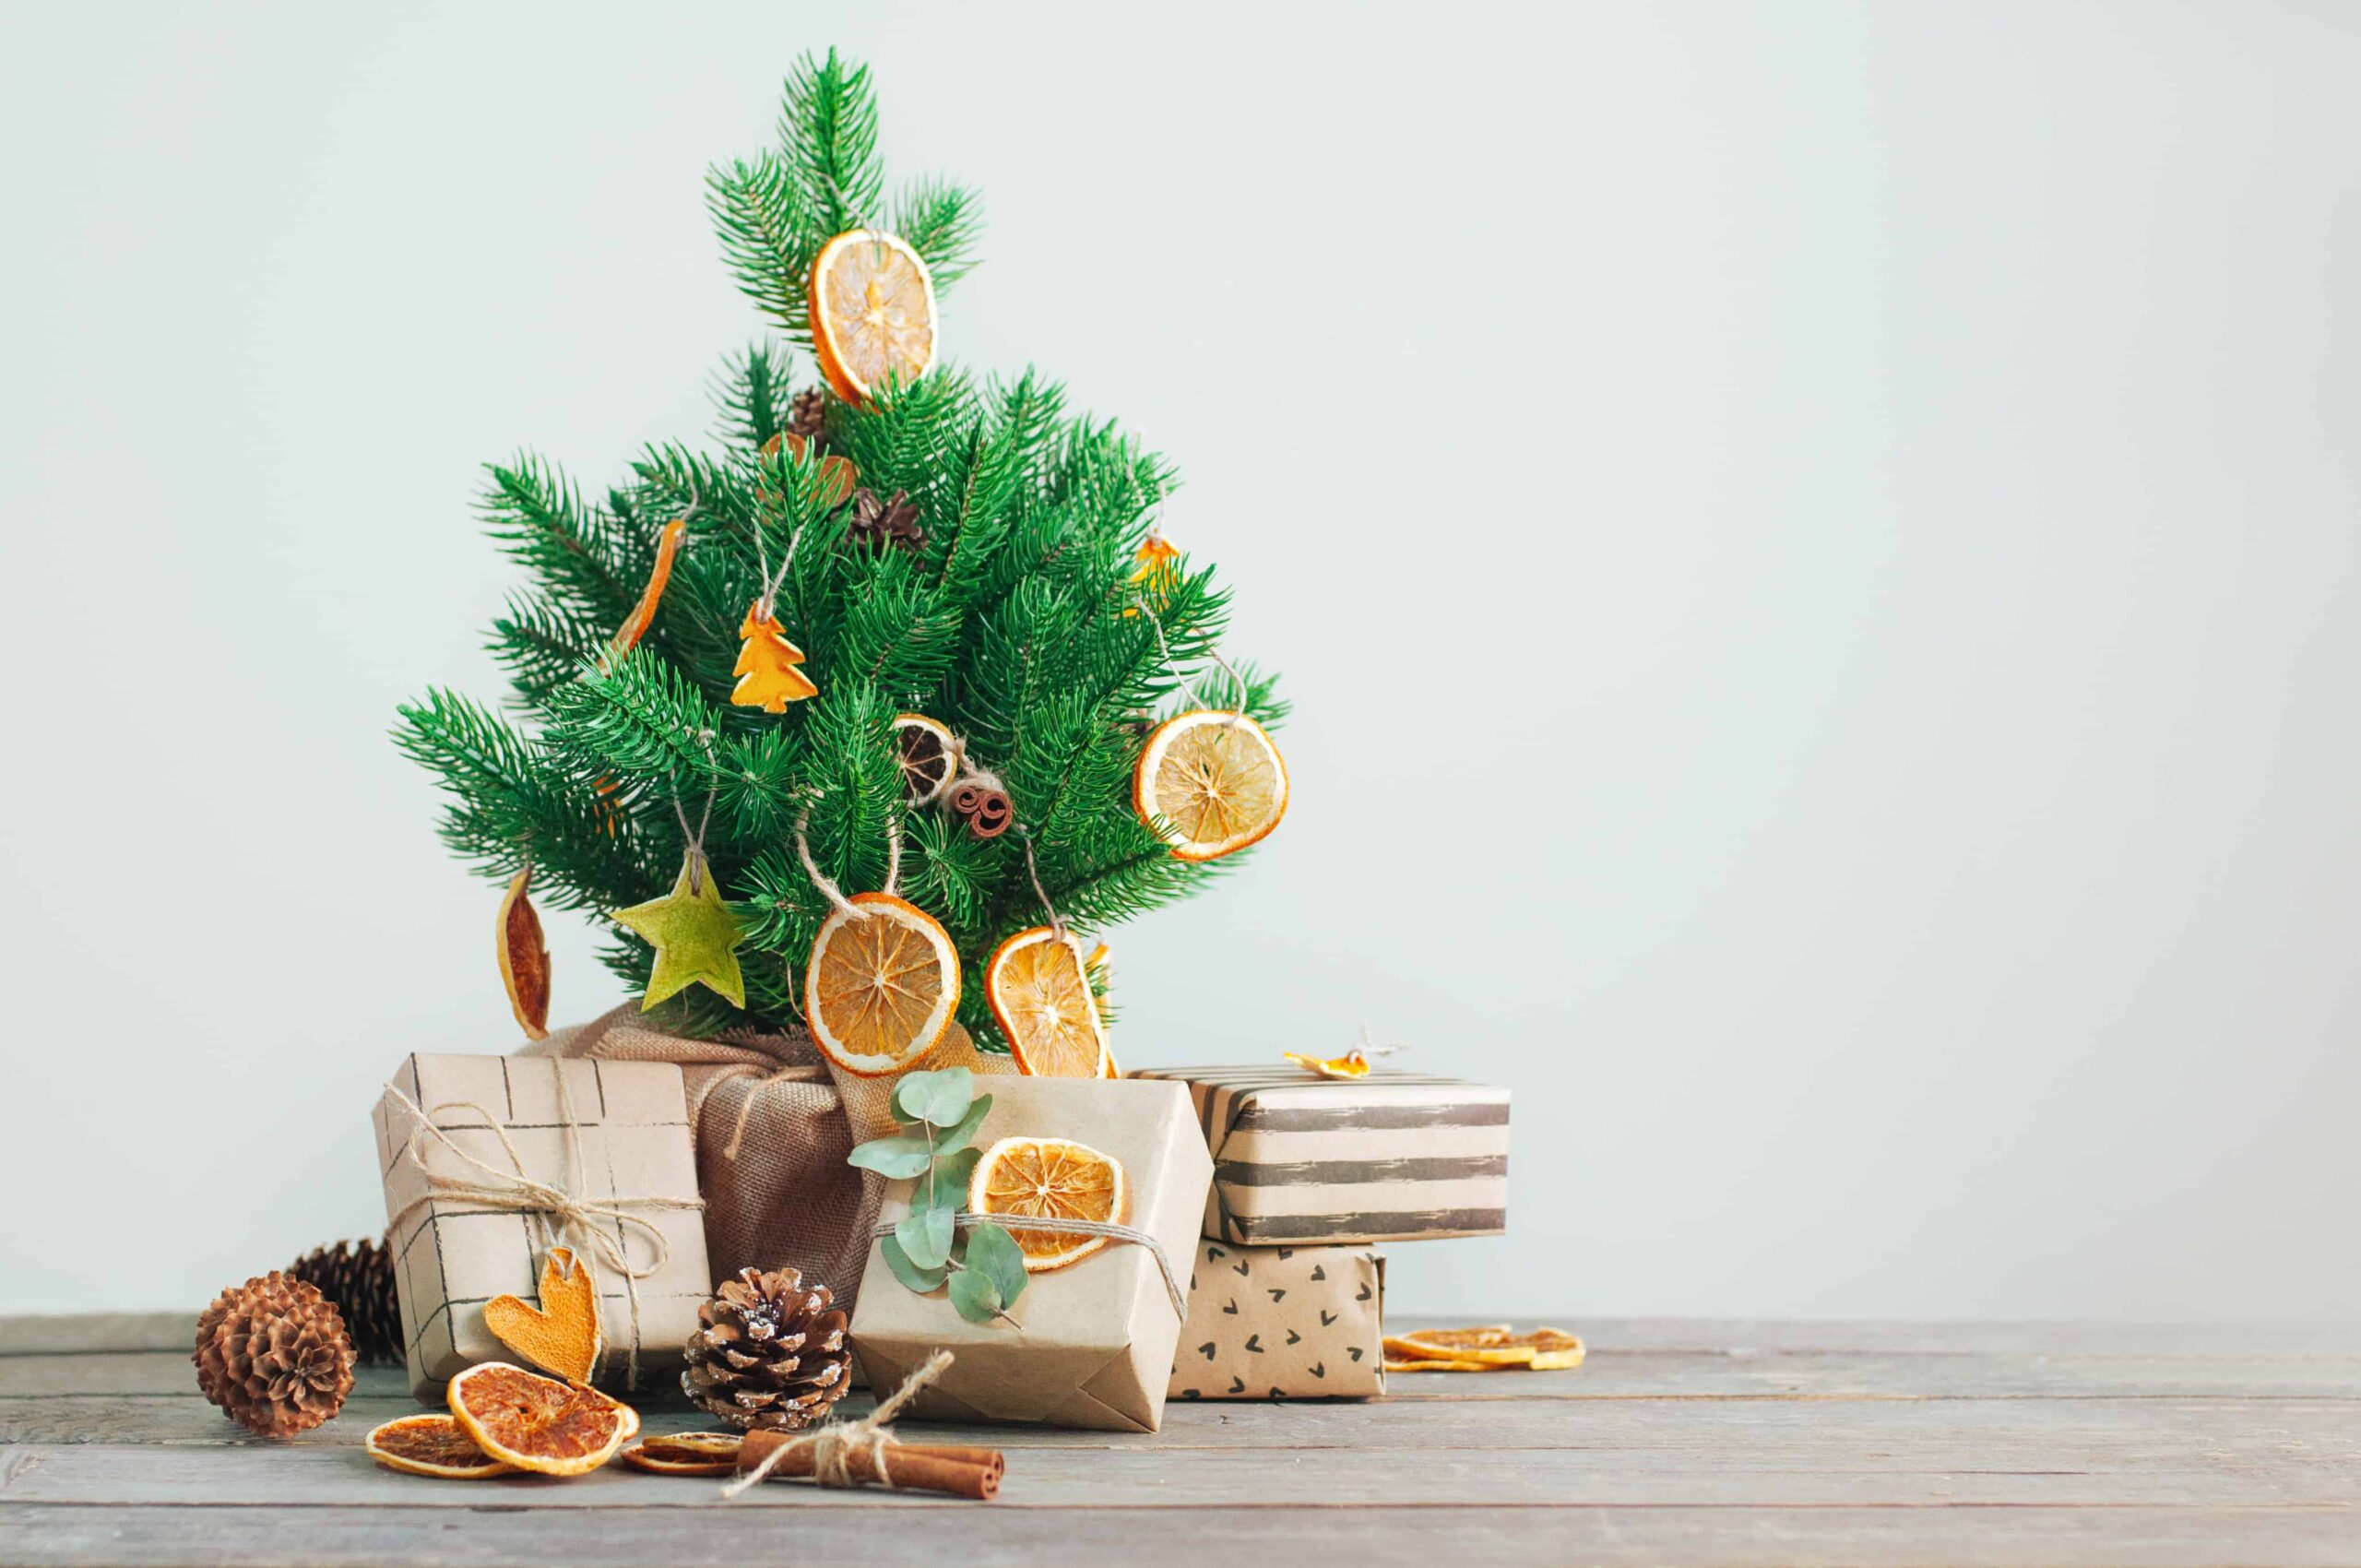 How to Decorate an Eco-Friendly Christmas Tree